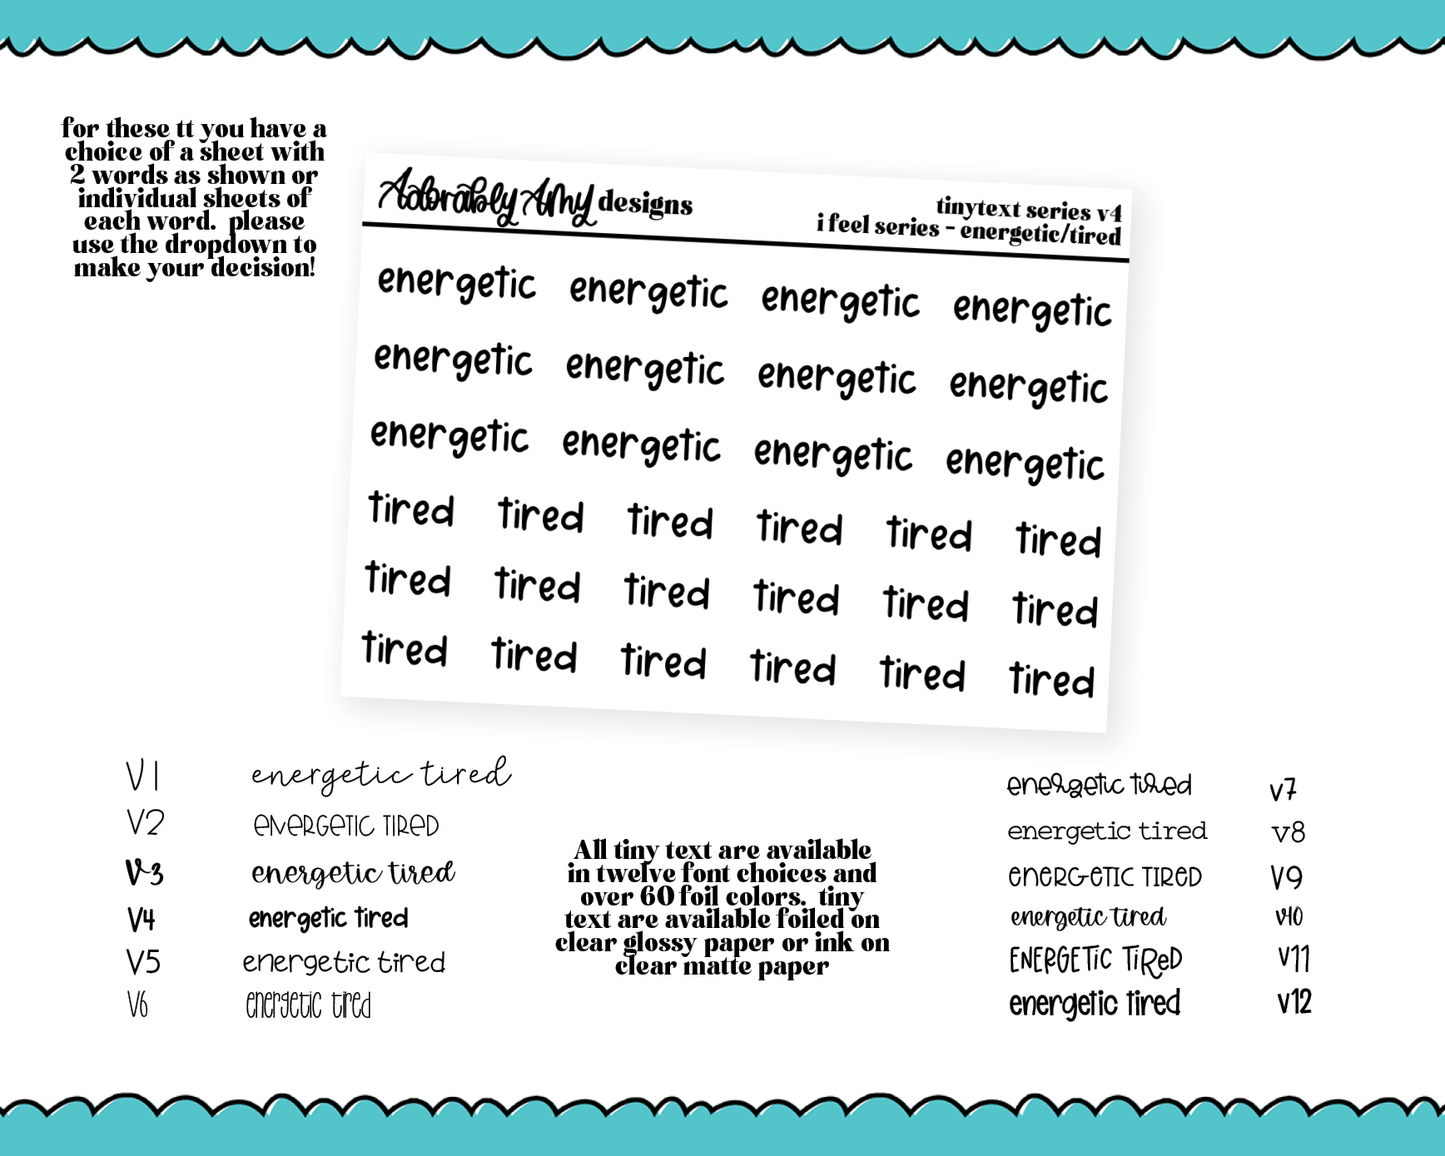 Foiled Tiny Text Series - Feelings Series - Energetic and Tired Checklist Size Planner Stickers for any Planner or Insert